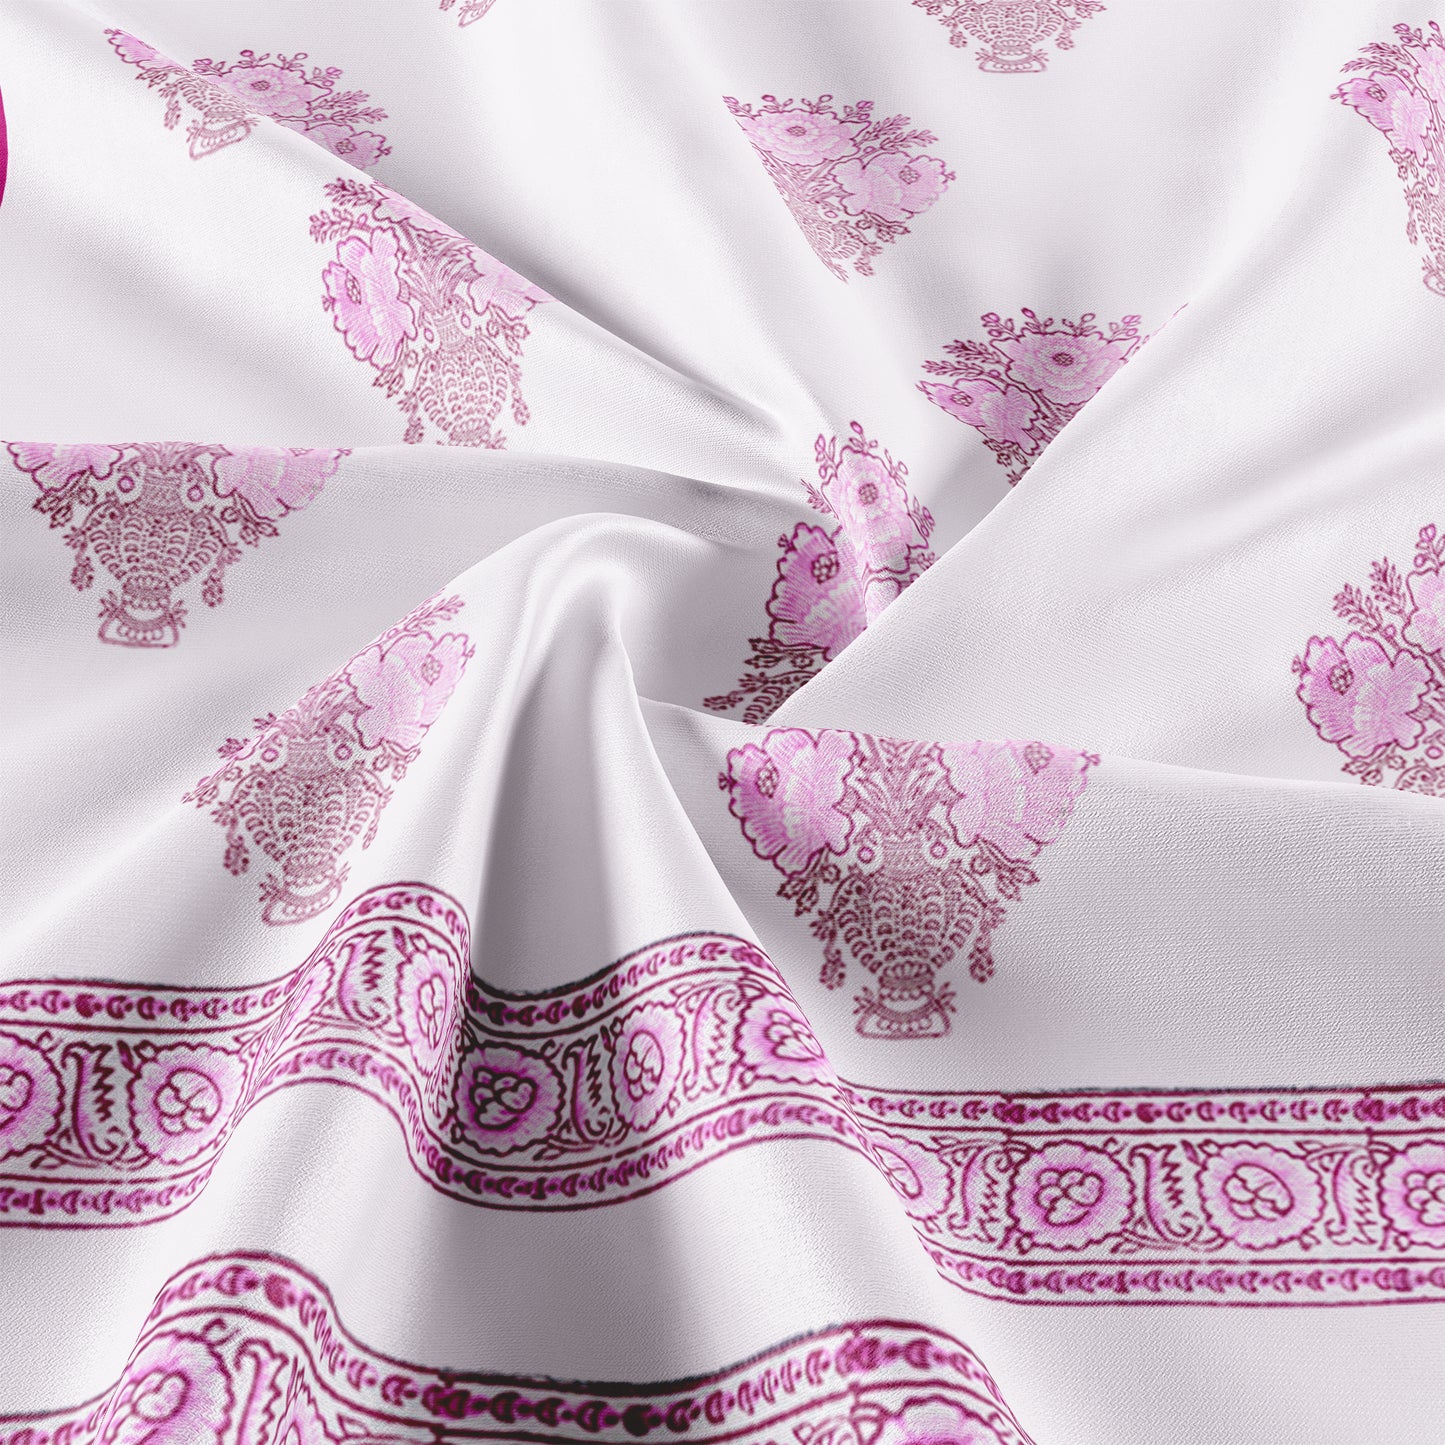 Cotton Blanket - Single Dohar ( 60 x 90 Inches) Pink Bouquet